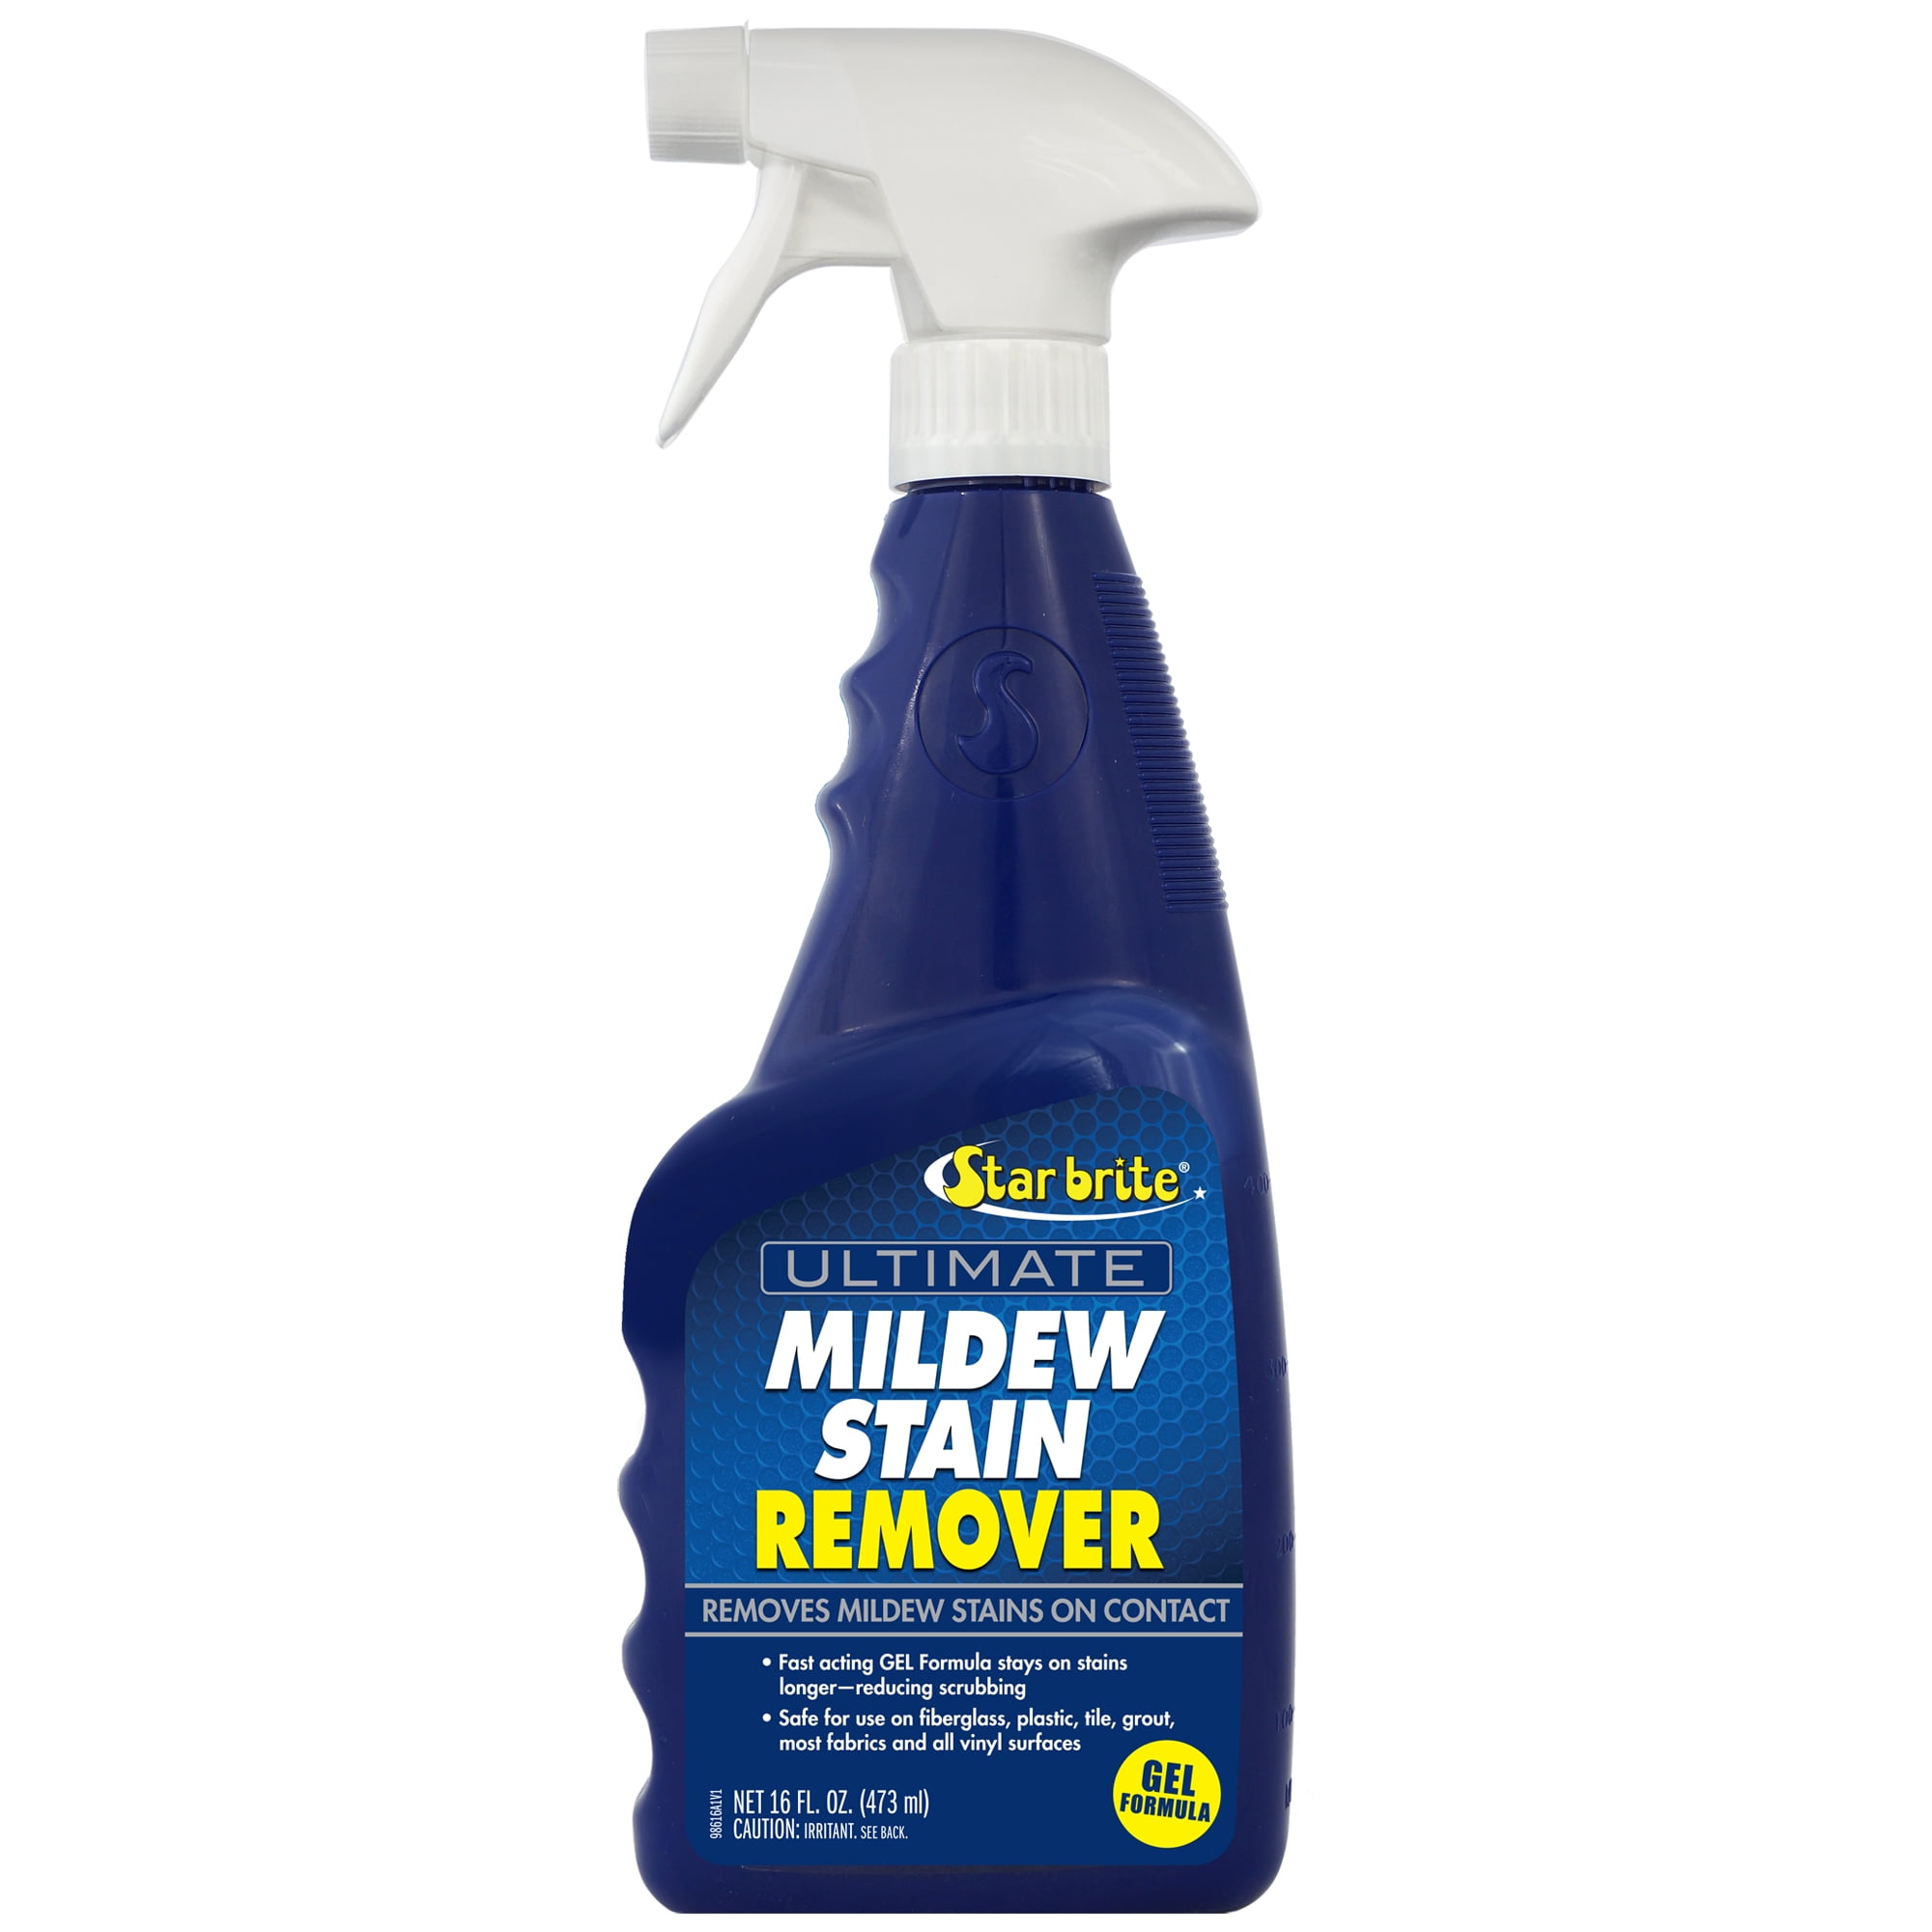 How to Clean and Remove Mildew with the Marine 31 Mildew Remover